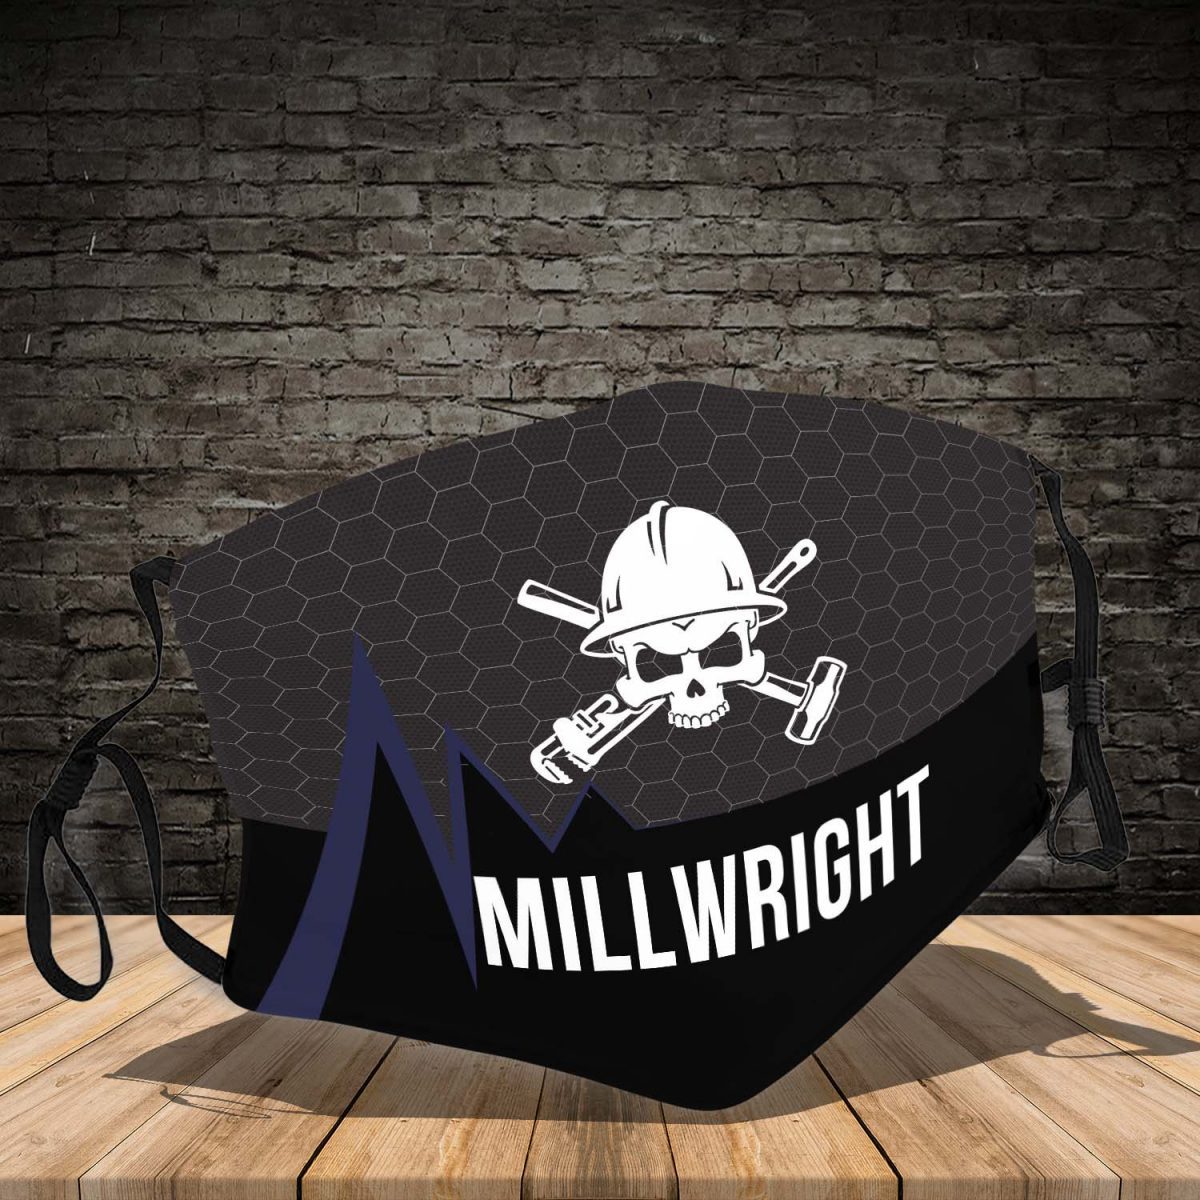 Millwiright 3d face mask